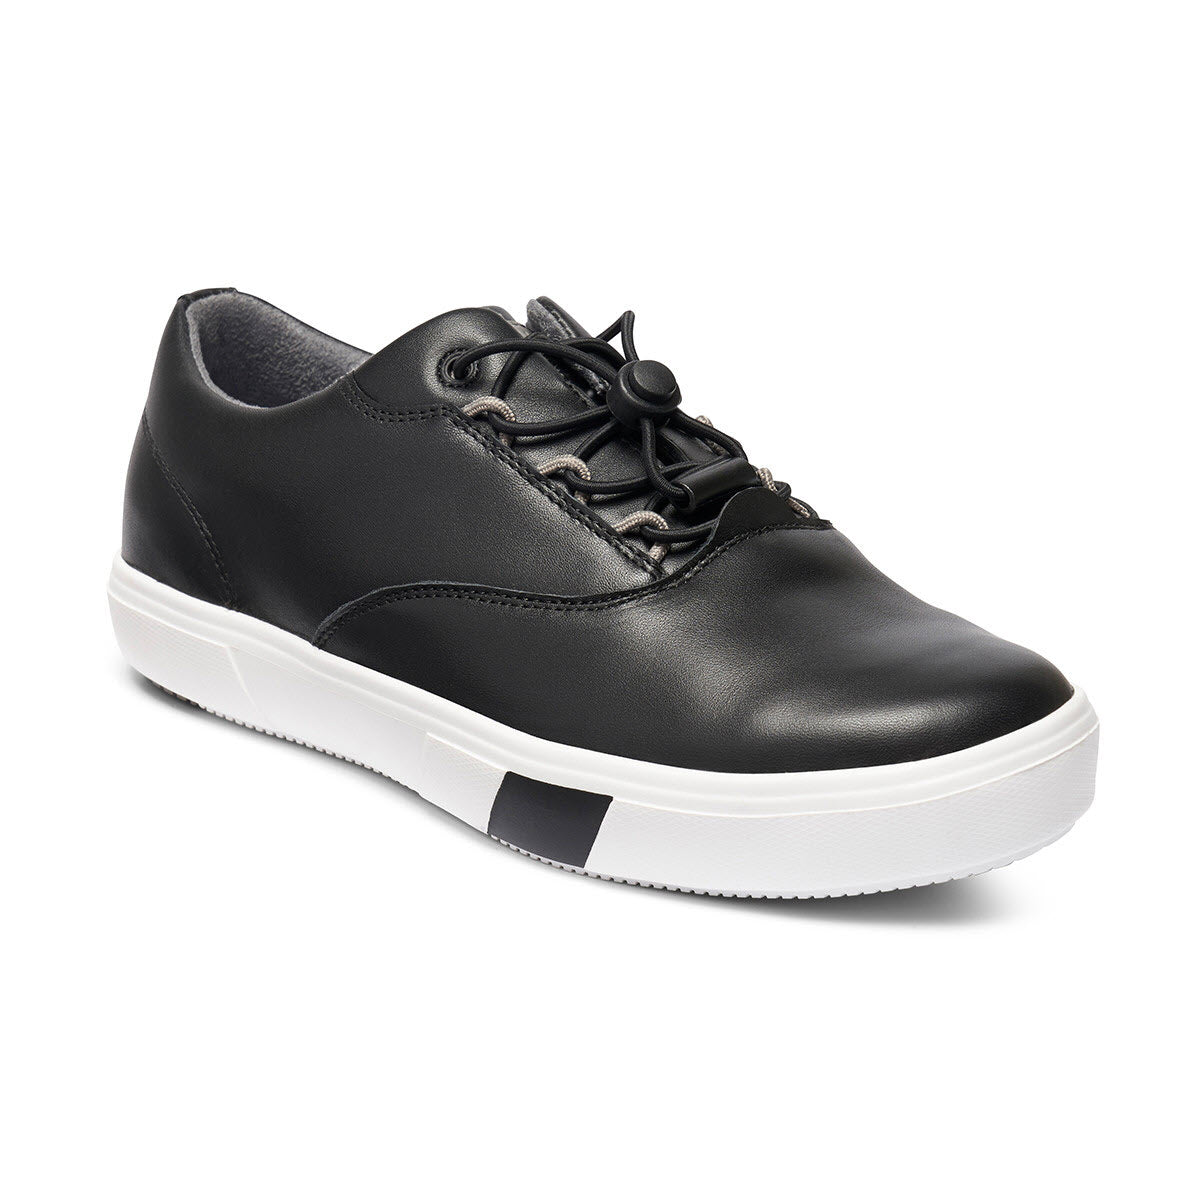 Anodyne black Nappa leather sneaker with white sole.